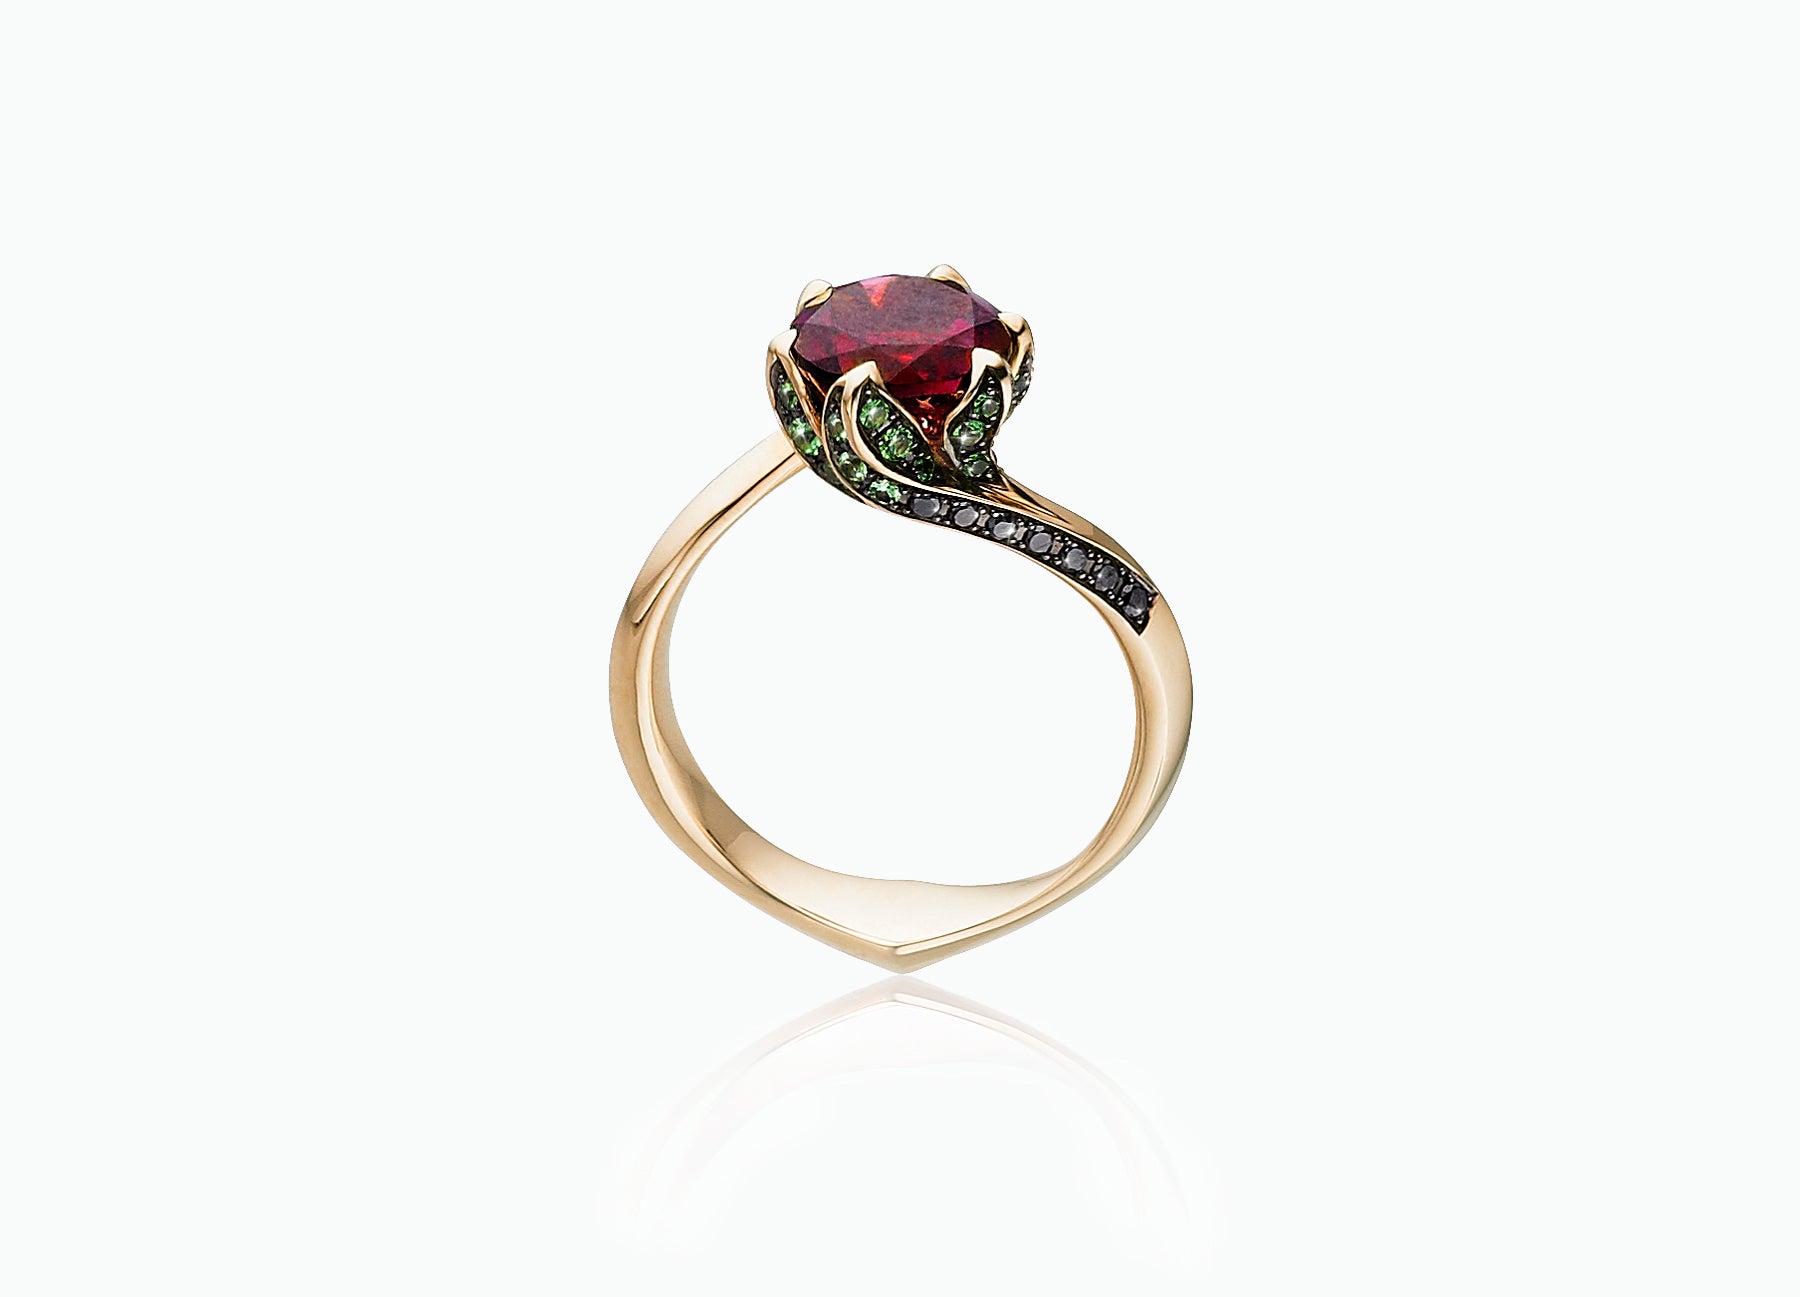 Lily Pad engagement ring in 18K yellow gold set with a rubellite tourmaline centre stone side view